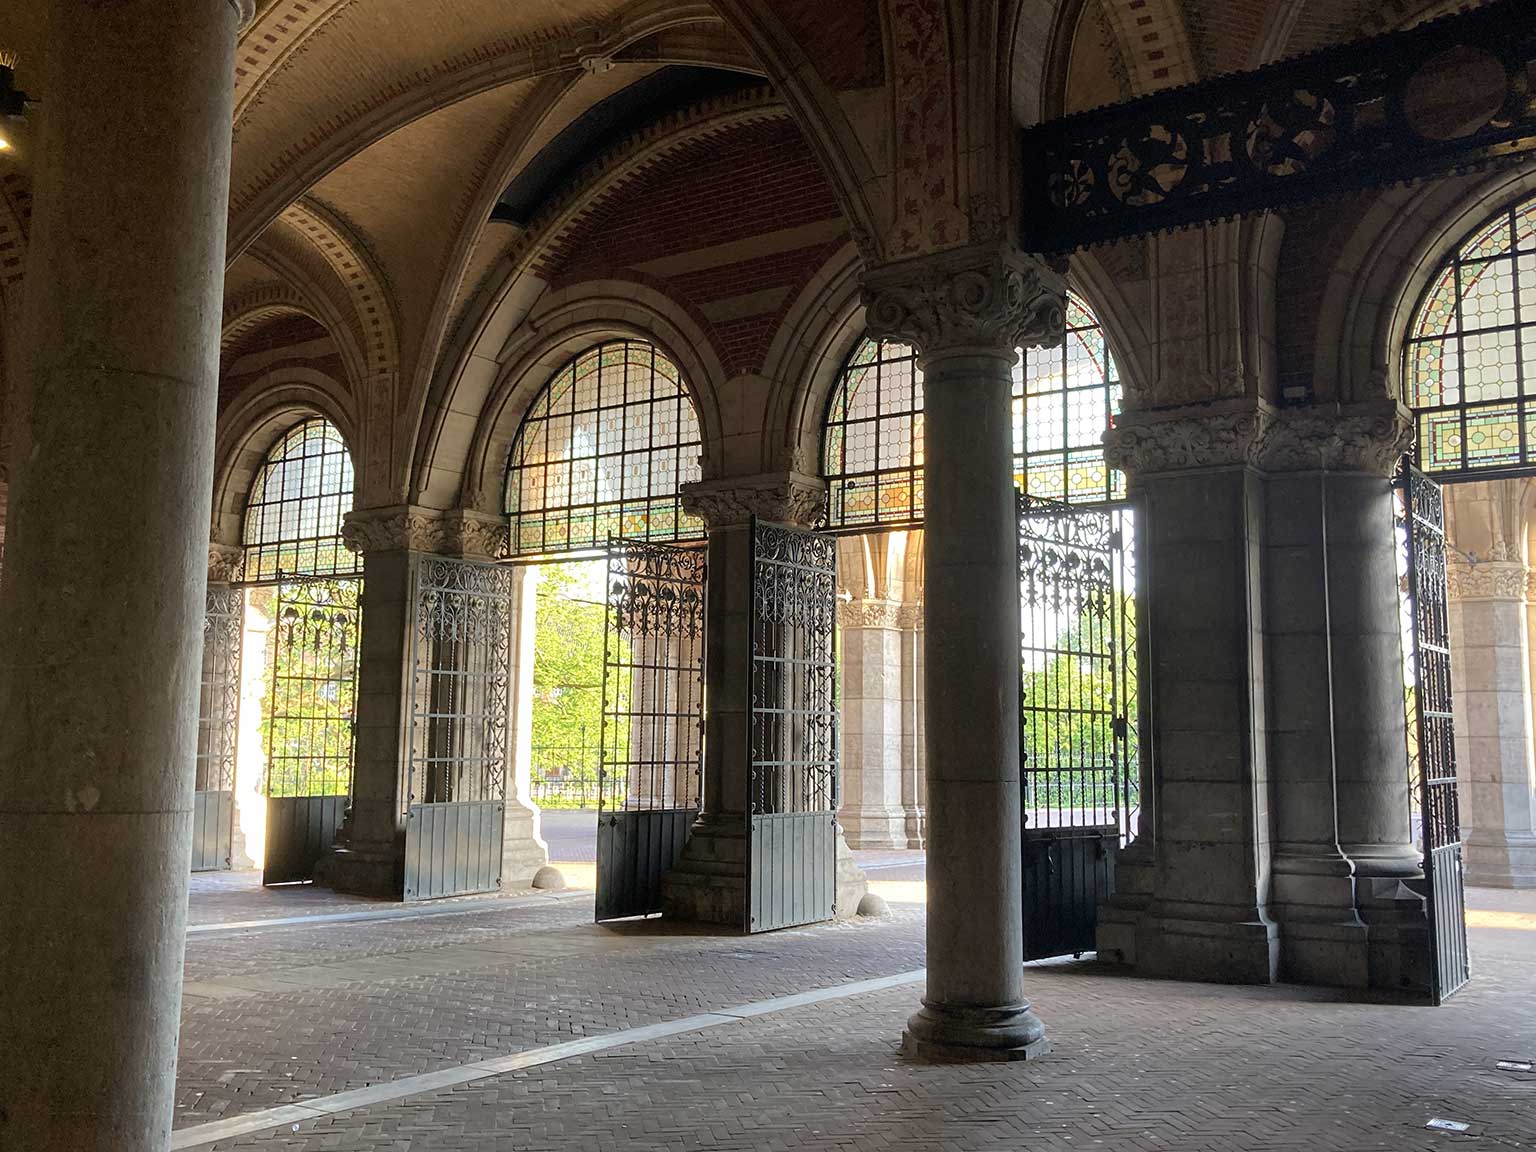 Southern exit of the Rijksmuseum Passage, Amsterdam, with stained glass windows